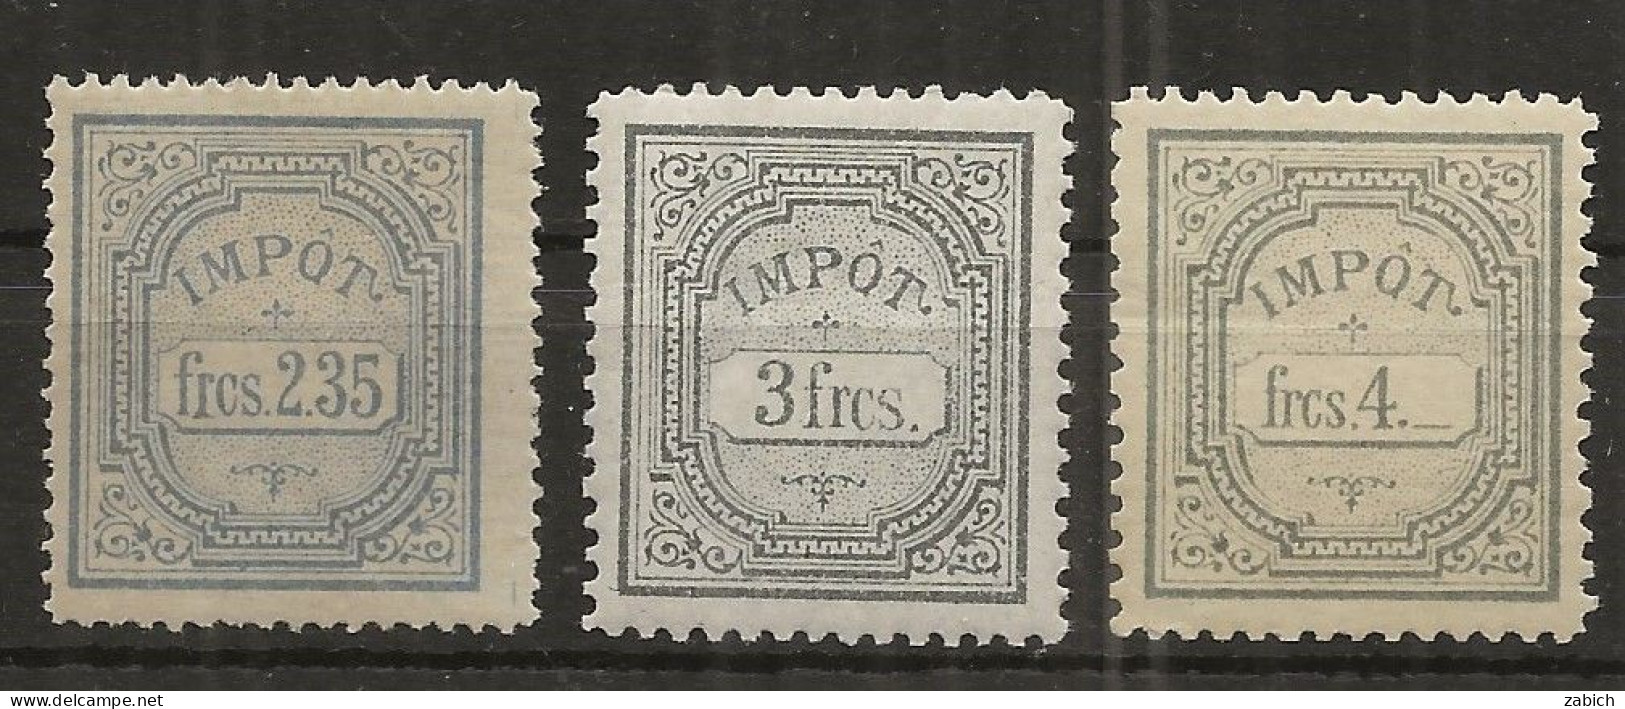 WAGONS LITS N° 39, 42, 45 Neufs (charnières) - Timbres